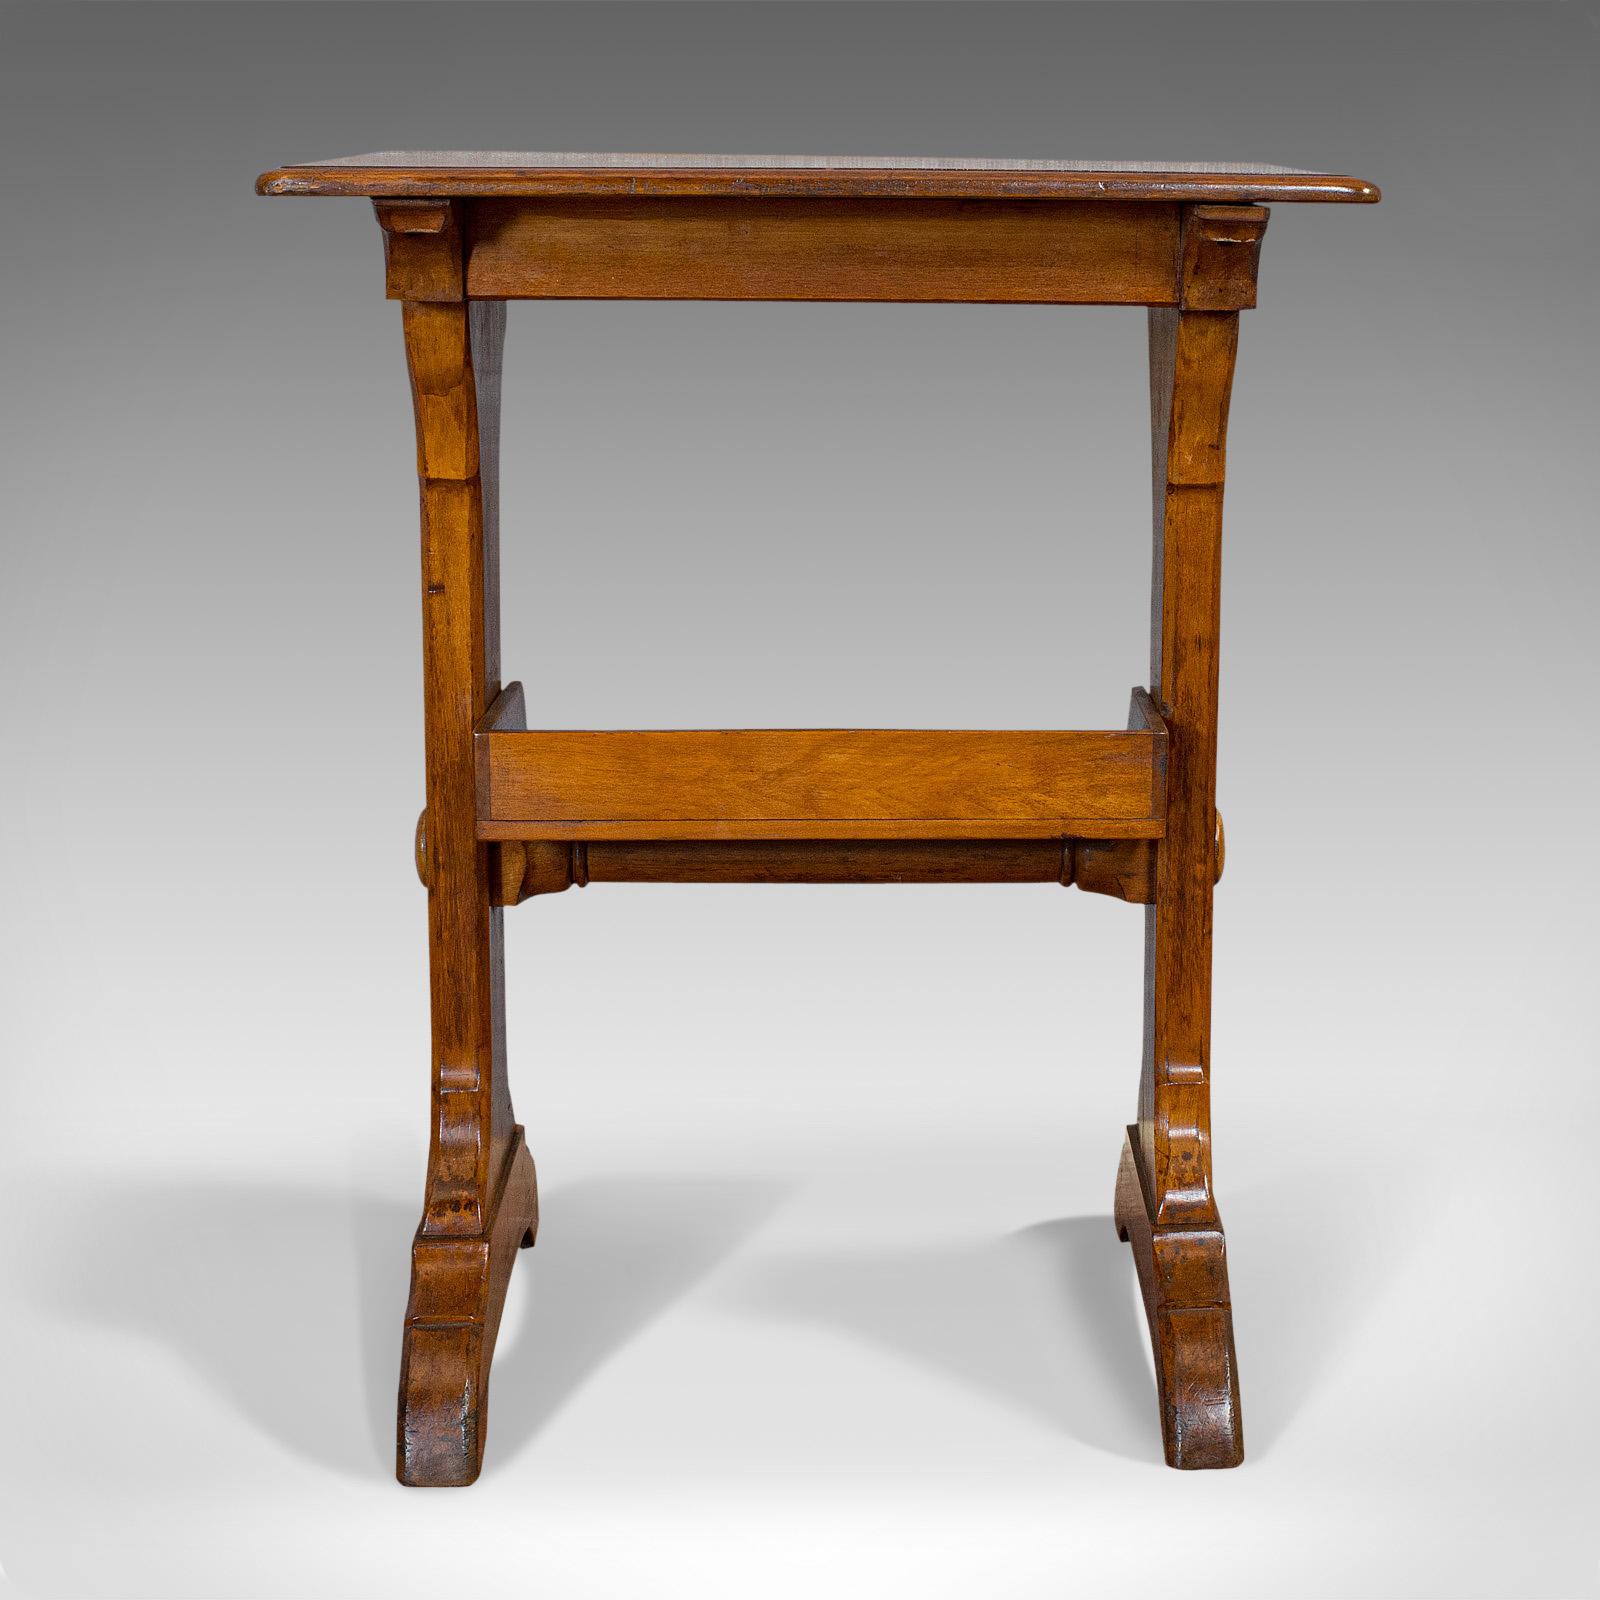 This is an antique craft table. An English, golden oak side or writing table, dating to the Victorian period, circa 1880.

A charming table with period appeal
Displays a desirable aged patina
Select oak with rich golden tones
Shows Fine grain